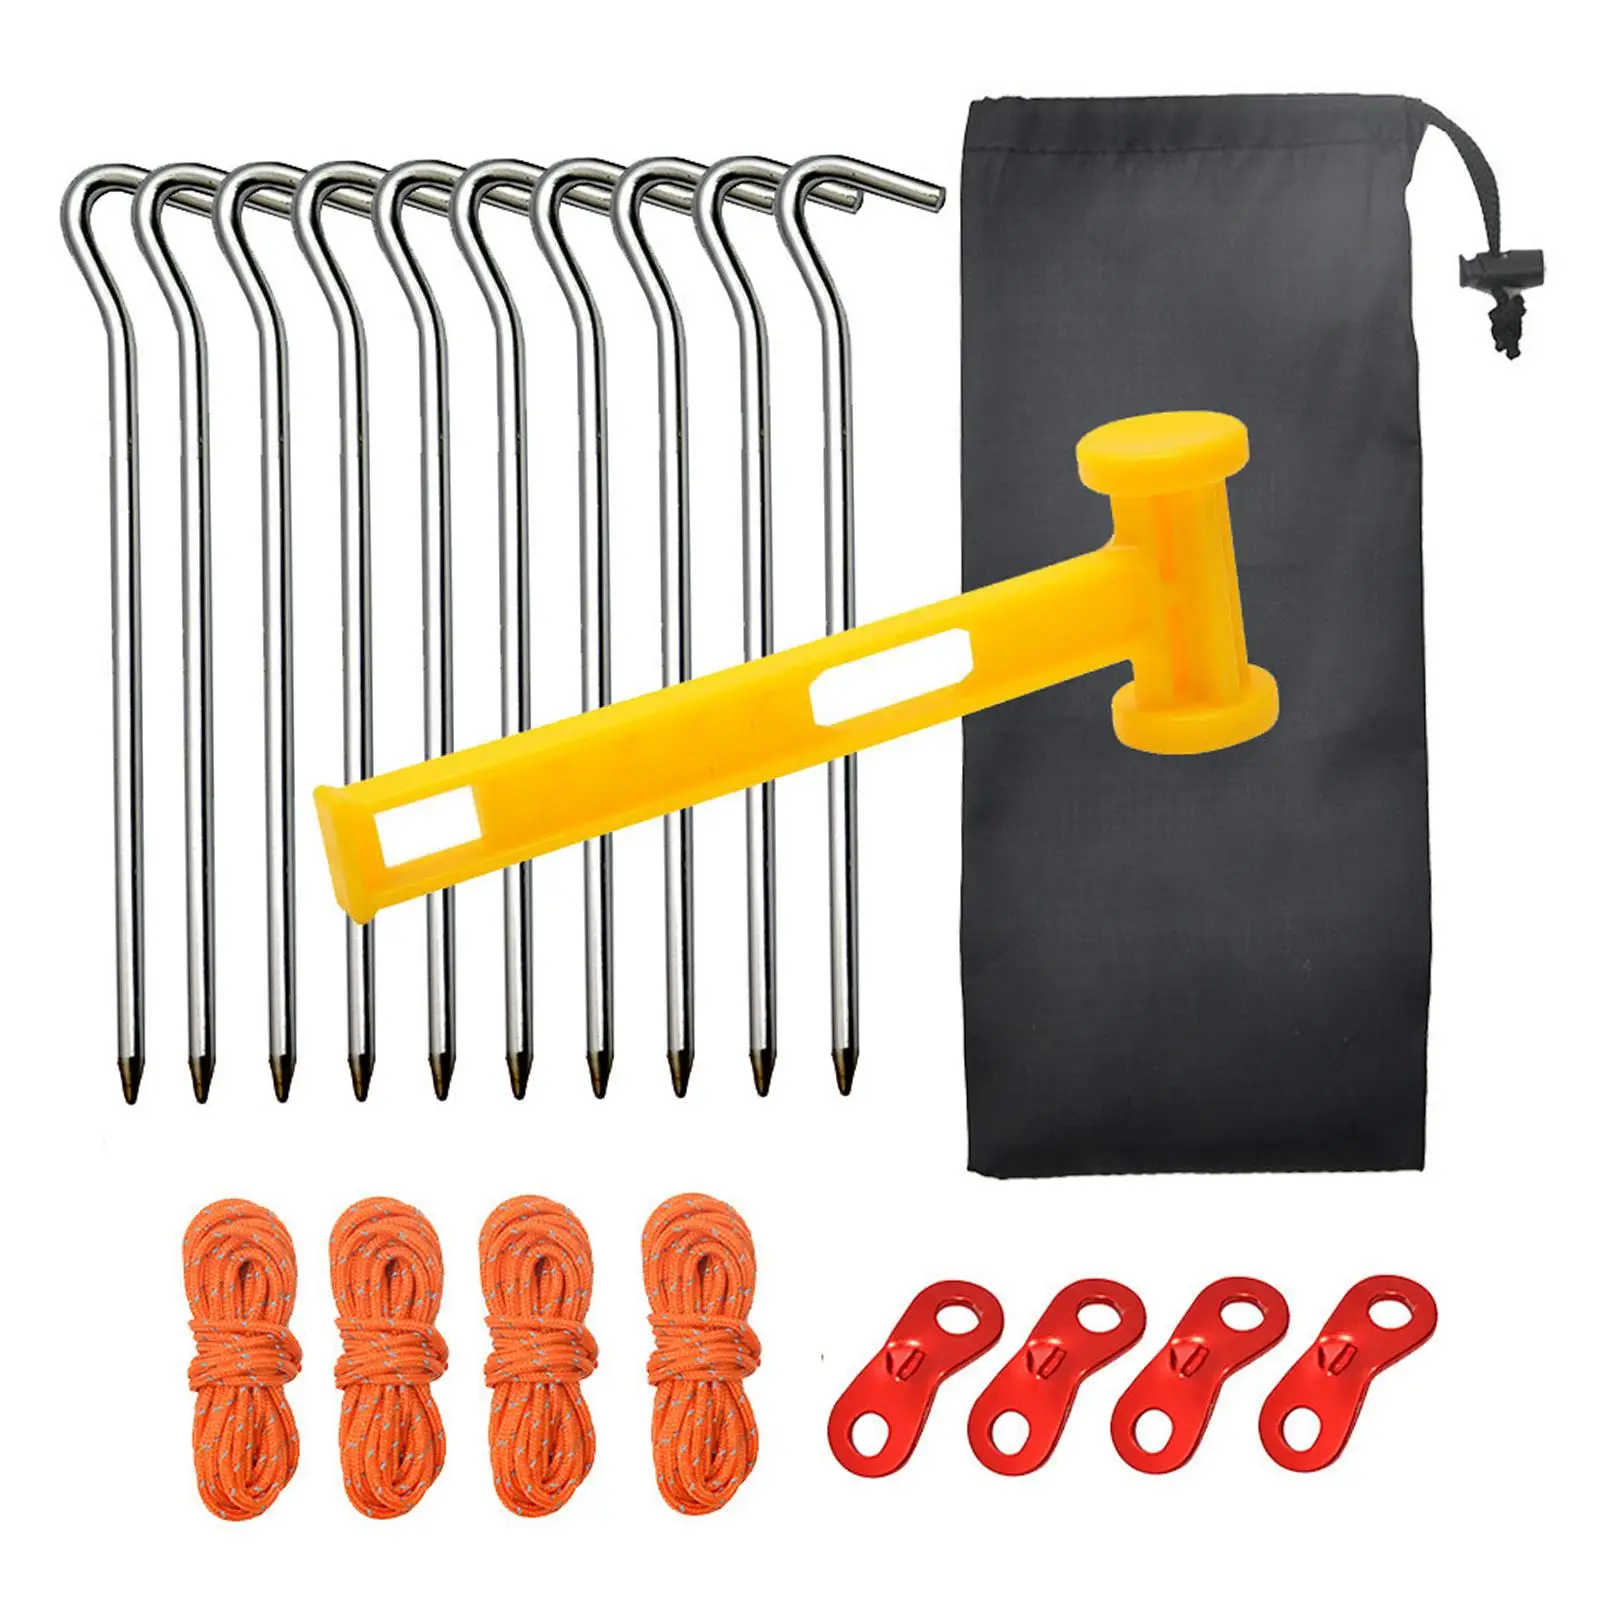 10x Tent Stakes Pegs Ground Stakes Lawn Ground Pin Camping Tent Nails Stake